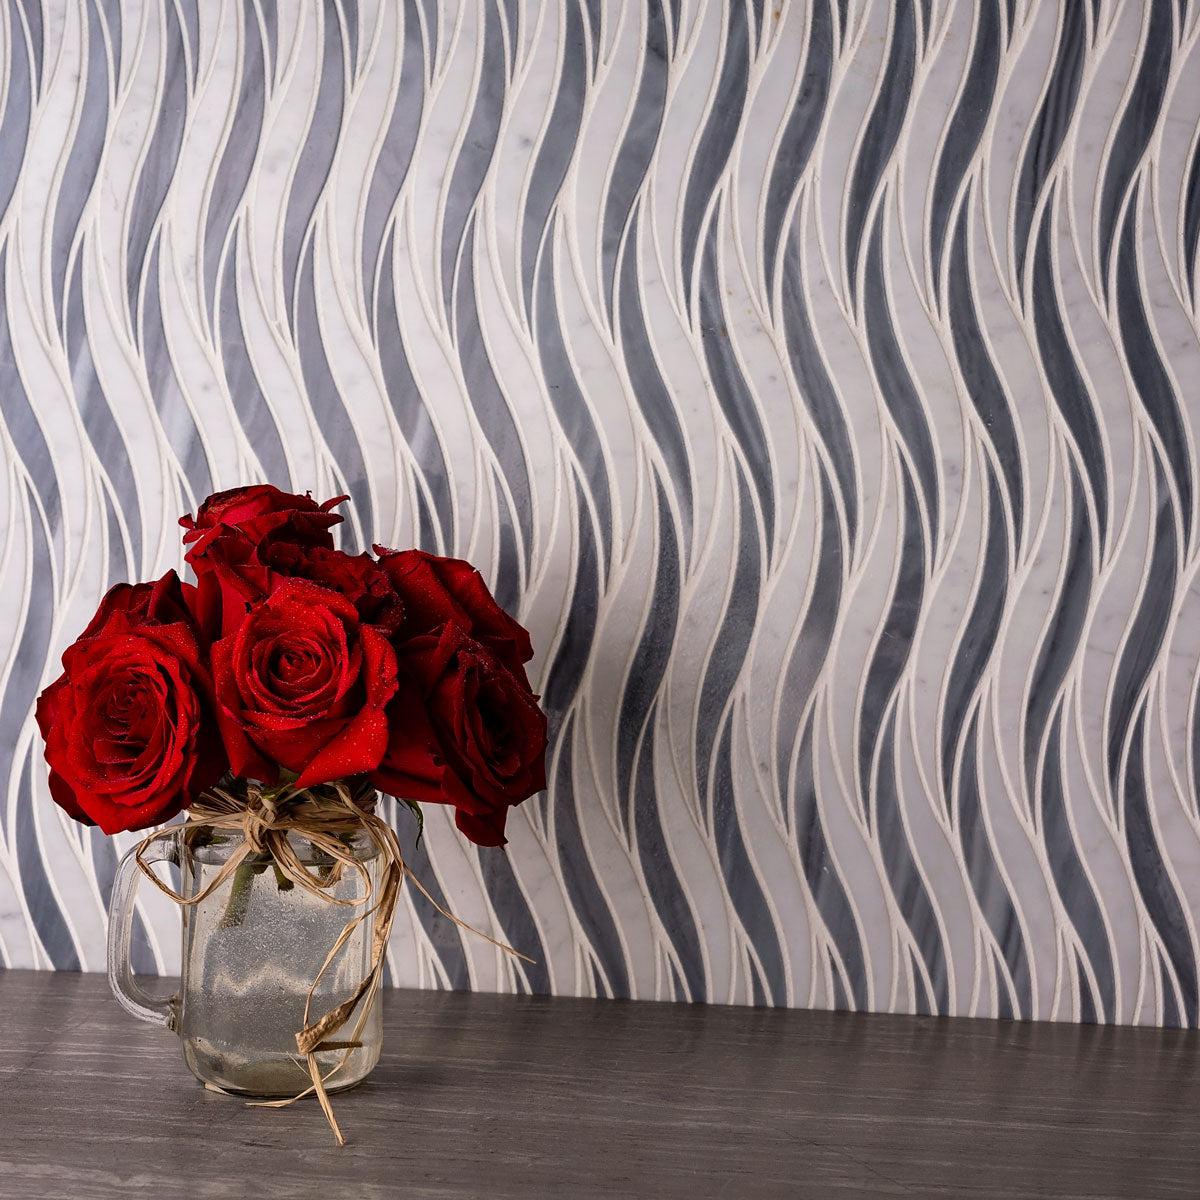 Decorative Tile Wall with Marble Wave Pattern